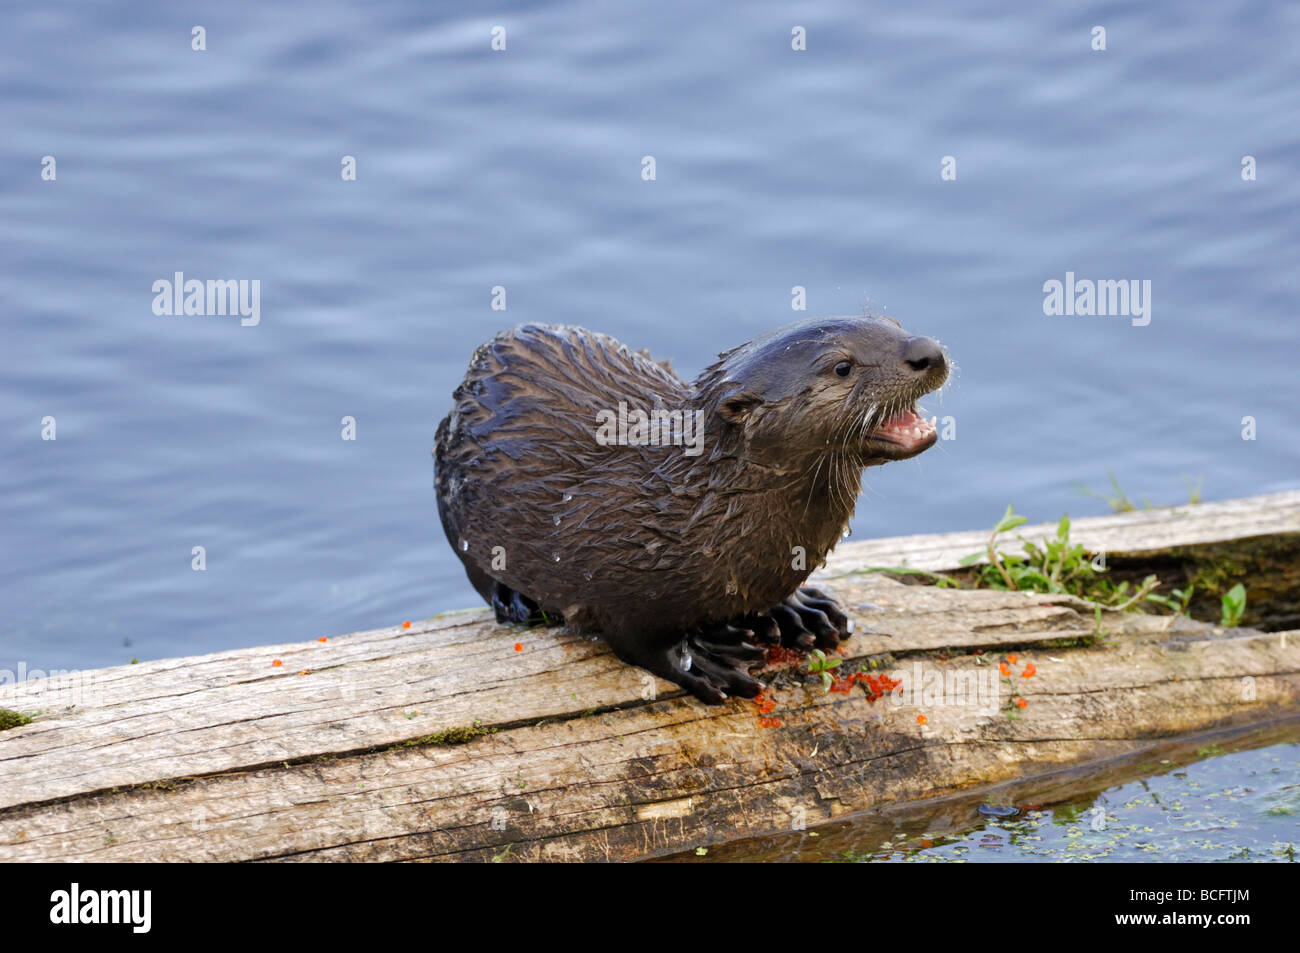 Stock photo of a river otter pup standing on a log, vocalizing, Yellowstone National Park, 2009. Stock Photo